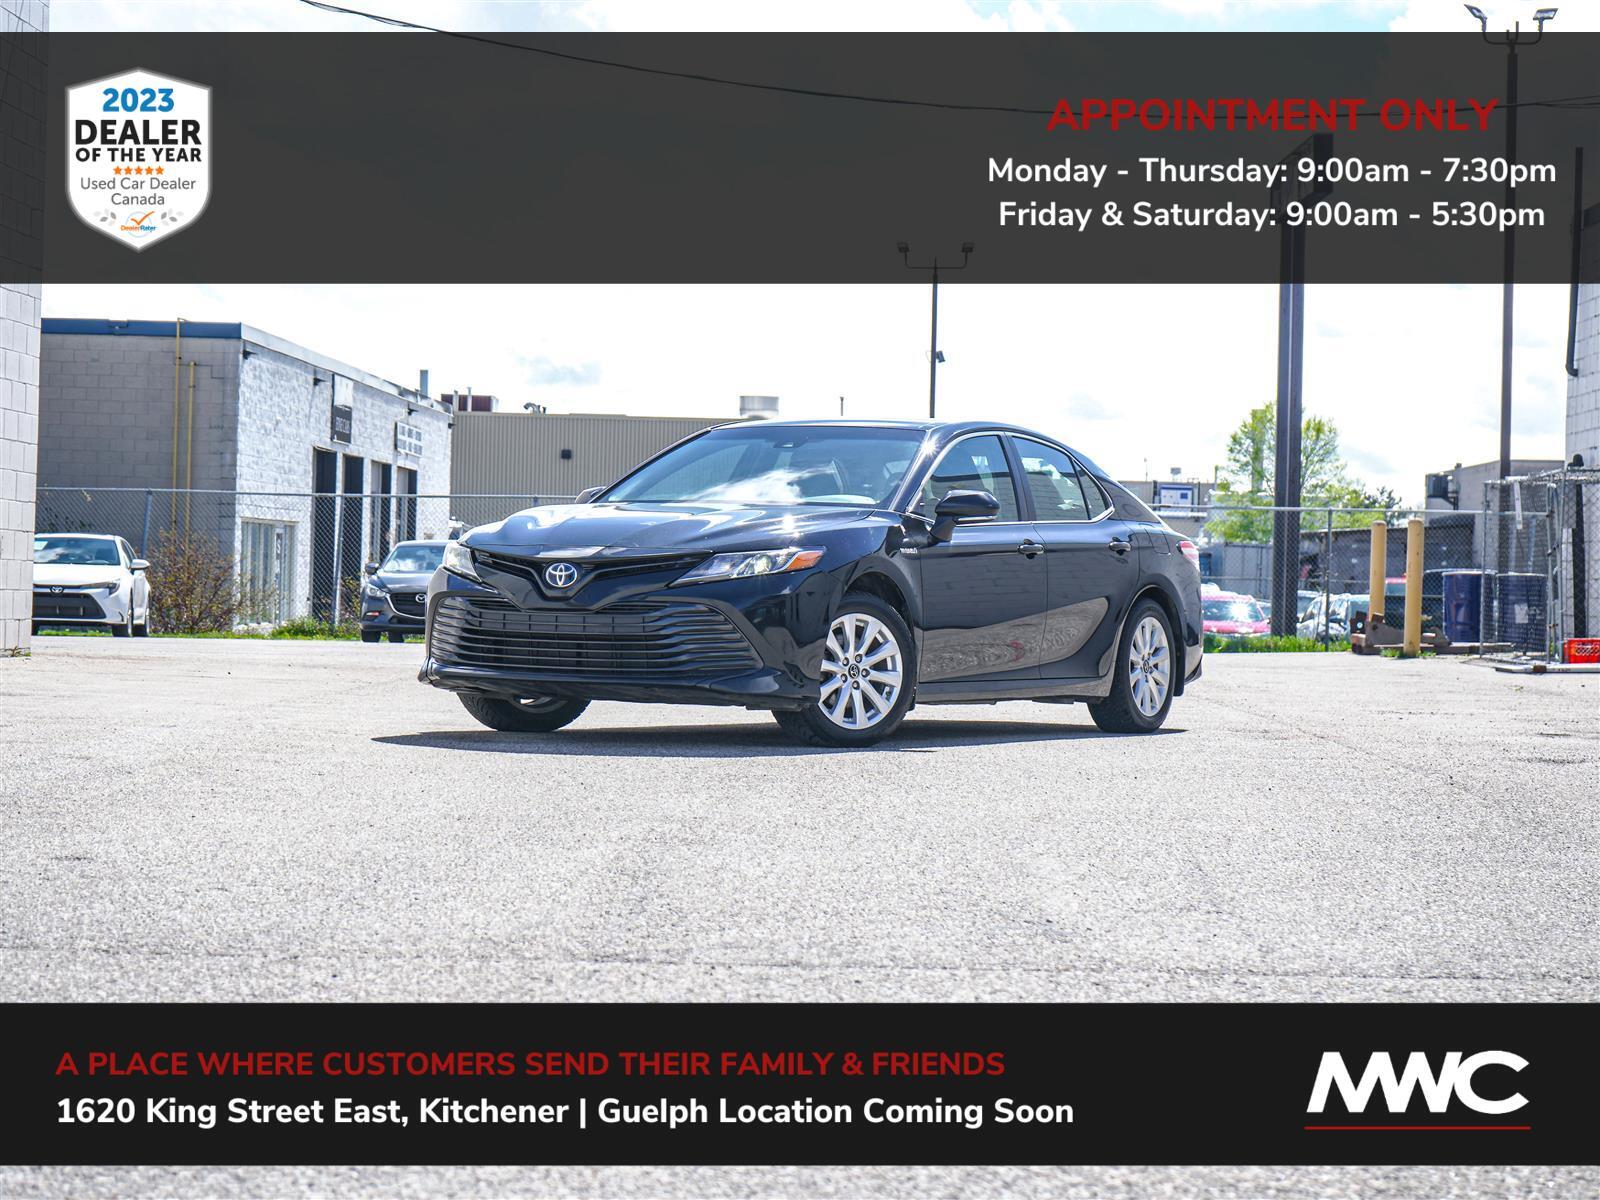 2018 Toyota Camry HYBRID LE | IN GUELPH, BY APPT. ONLY